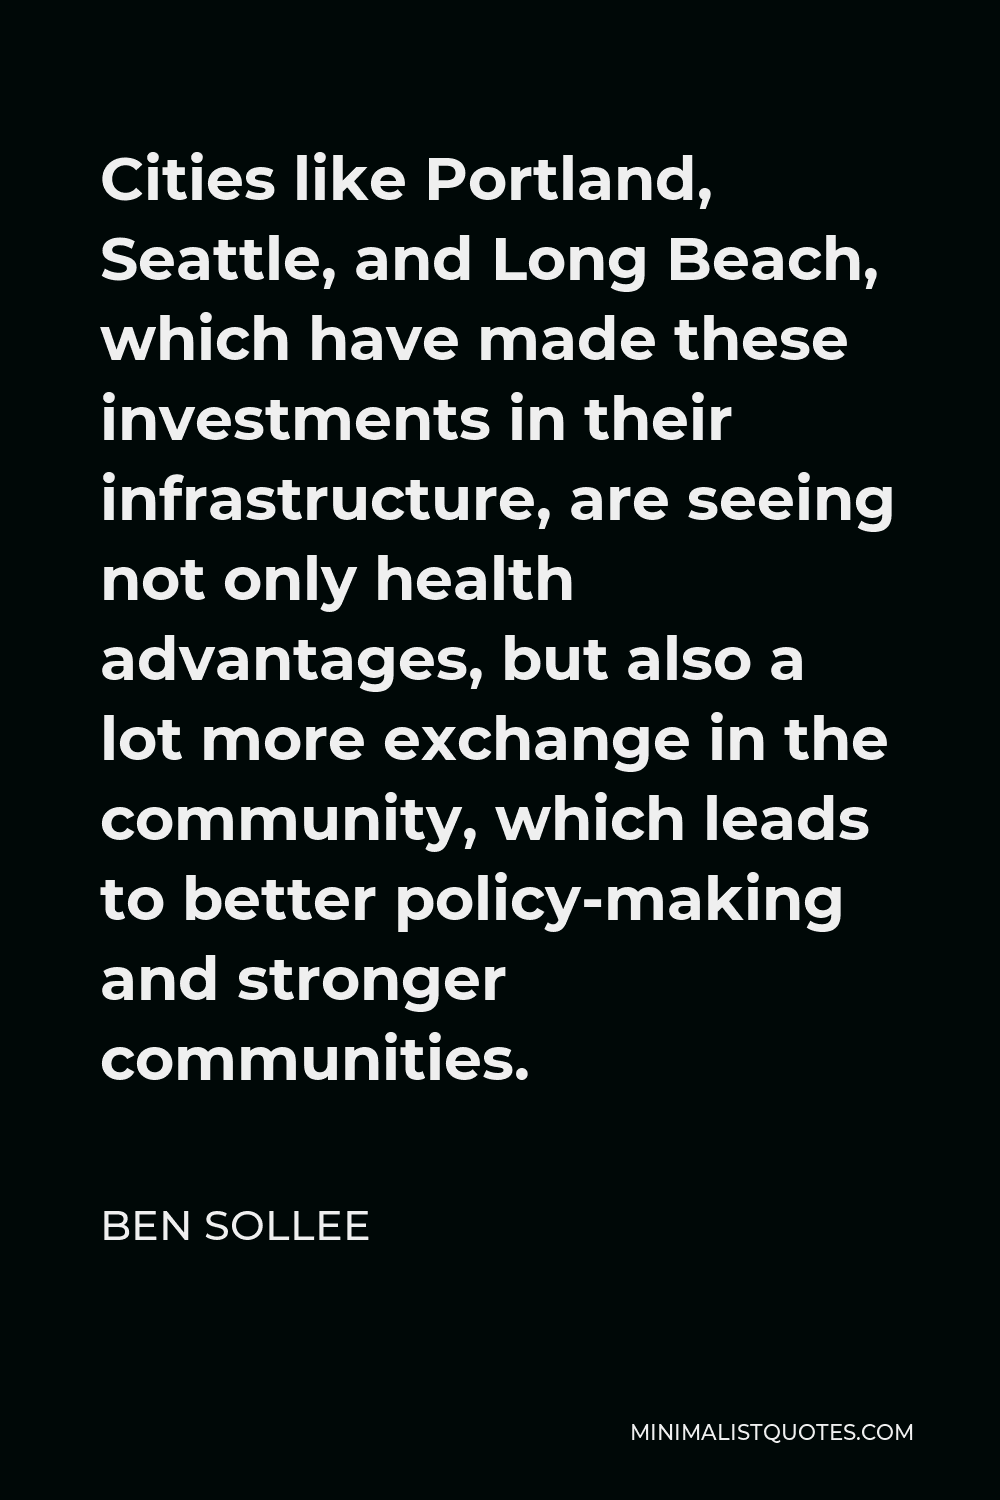 Ben Sollee Quote - Cities like Portland, Seattle, and Long Beach, which have made these investments in their infrastructure, are seeing not only health advantages, but also a lot more exchange in the community, which leads to better policy-making and stronger communities.